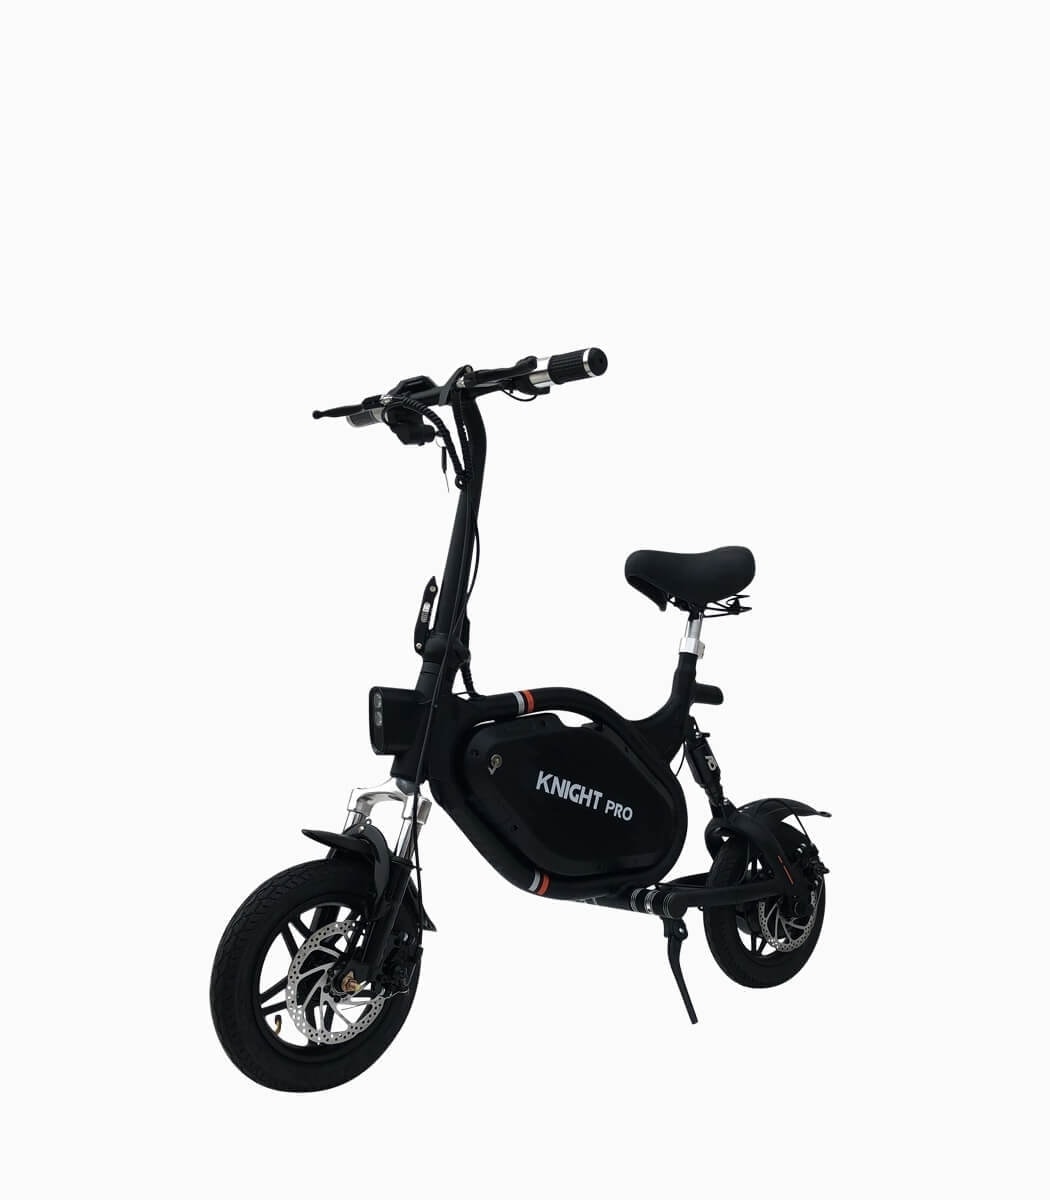 KNIGHT PRO (BLACK17.5AH) UL2272 certified electric scooter angled left V1